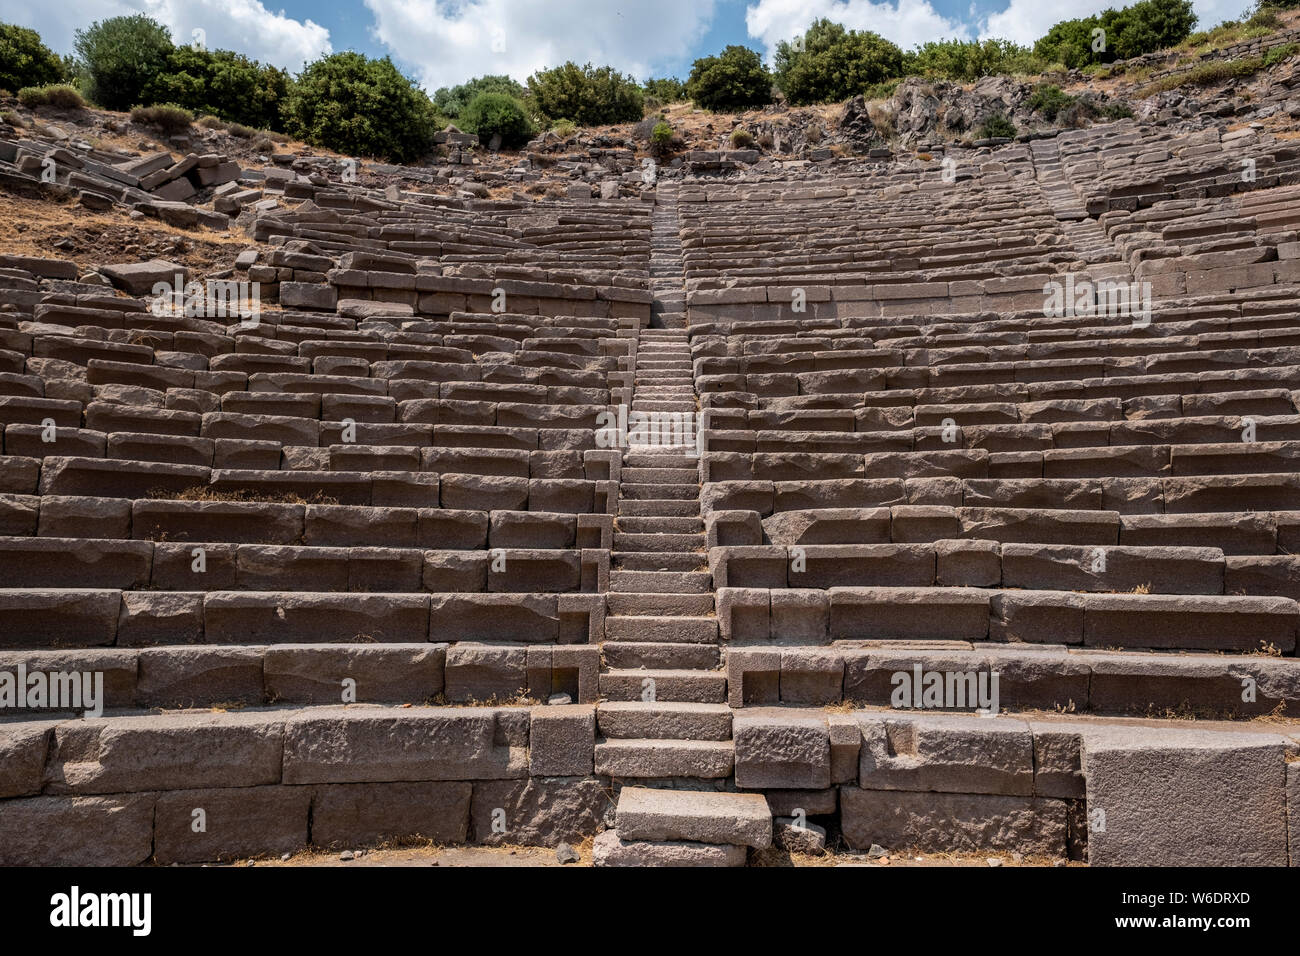 The ancient Greek amphitheatre of Assos in modern day Turkey Stock Photo